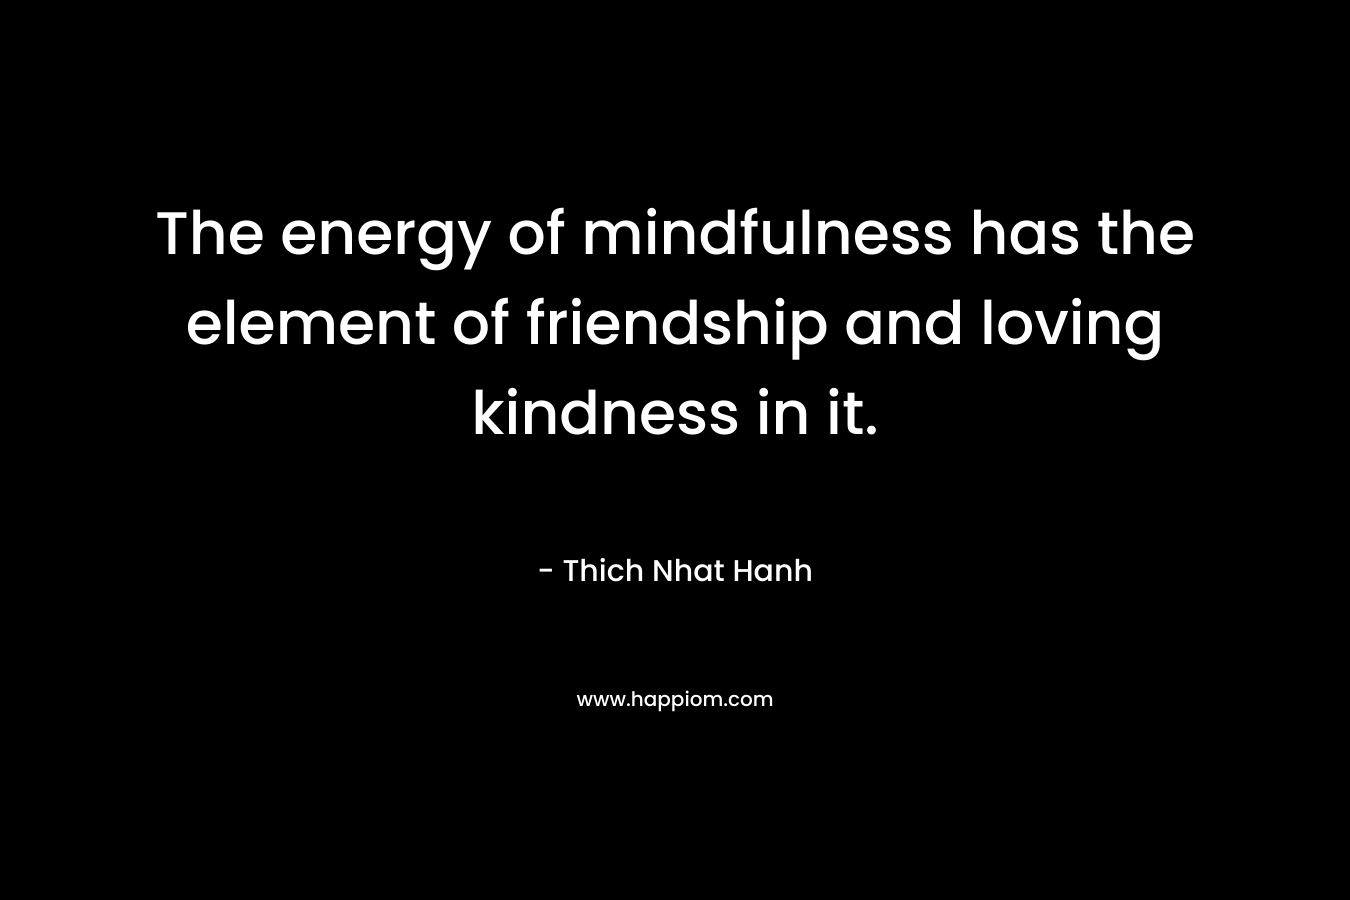 The energy of mindfulness has the element of friendship and loving kindness in it. – Thich Nhat Hanh